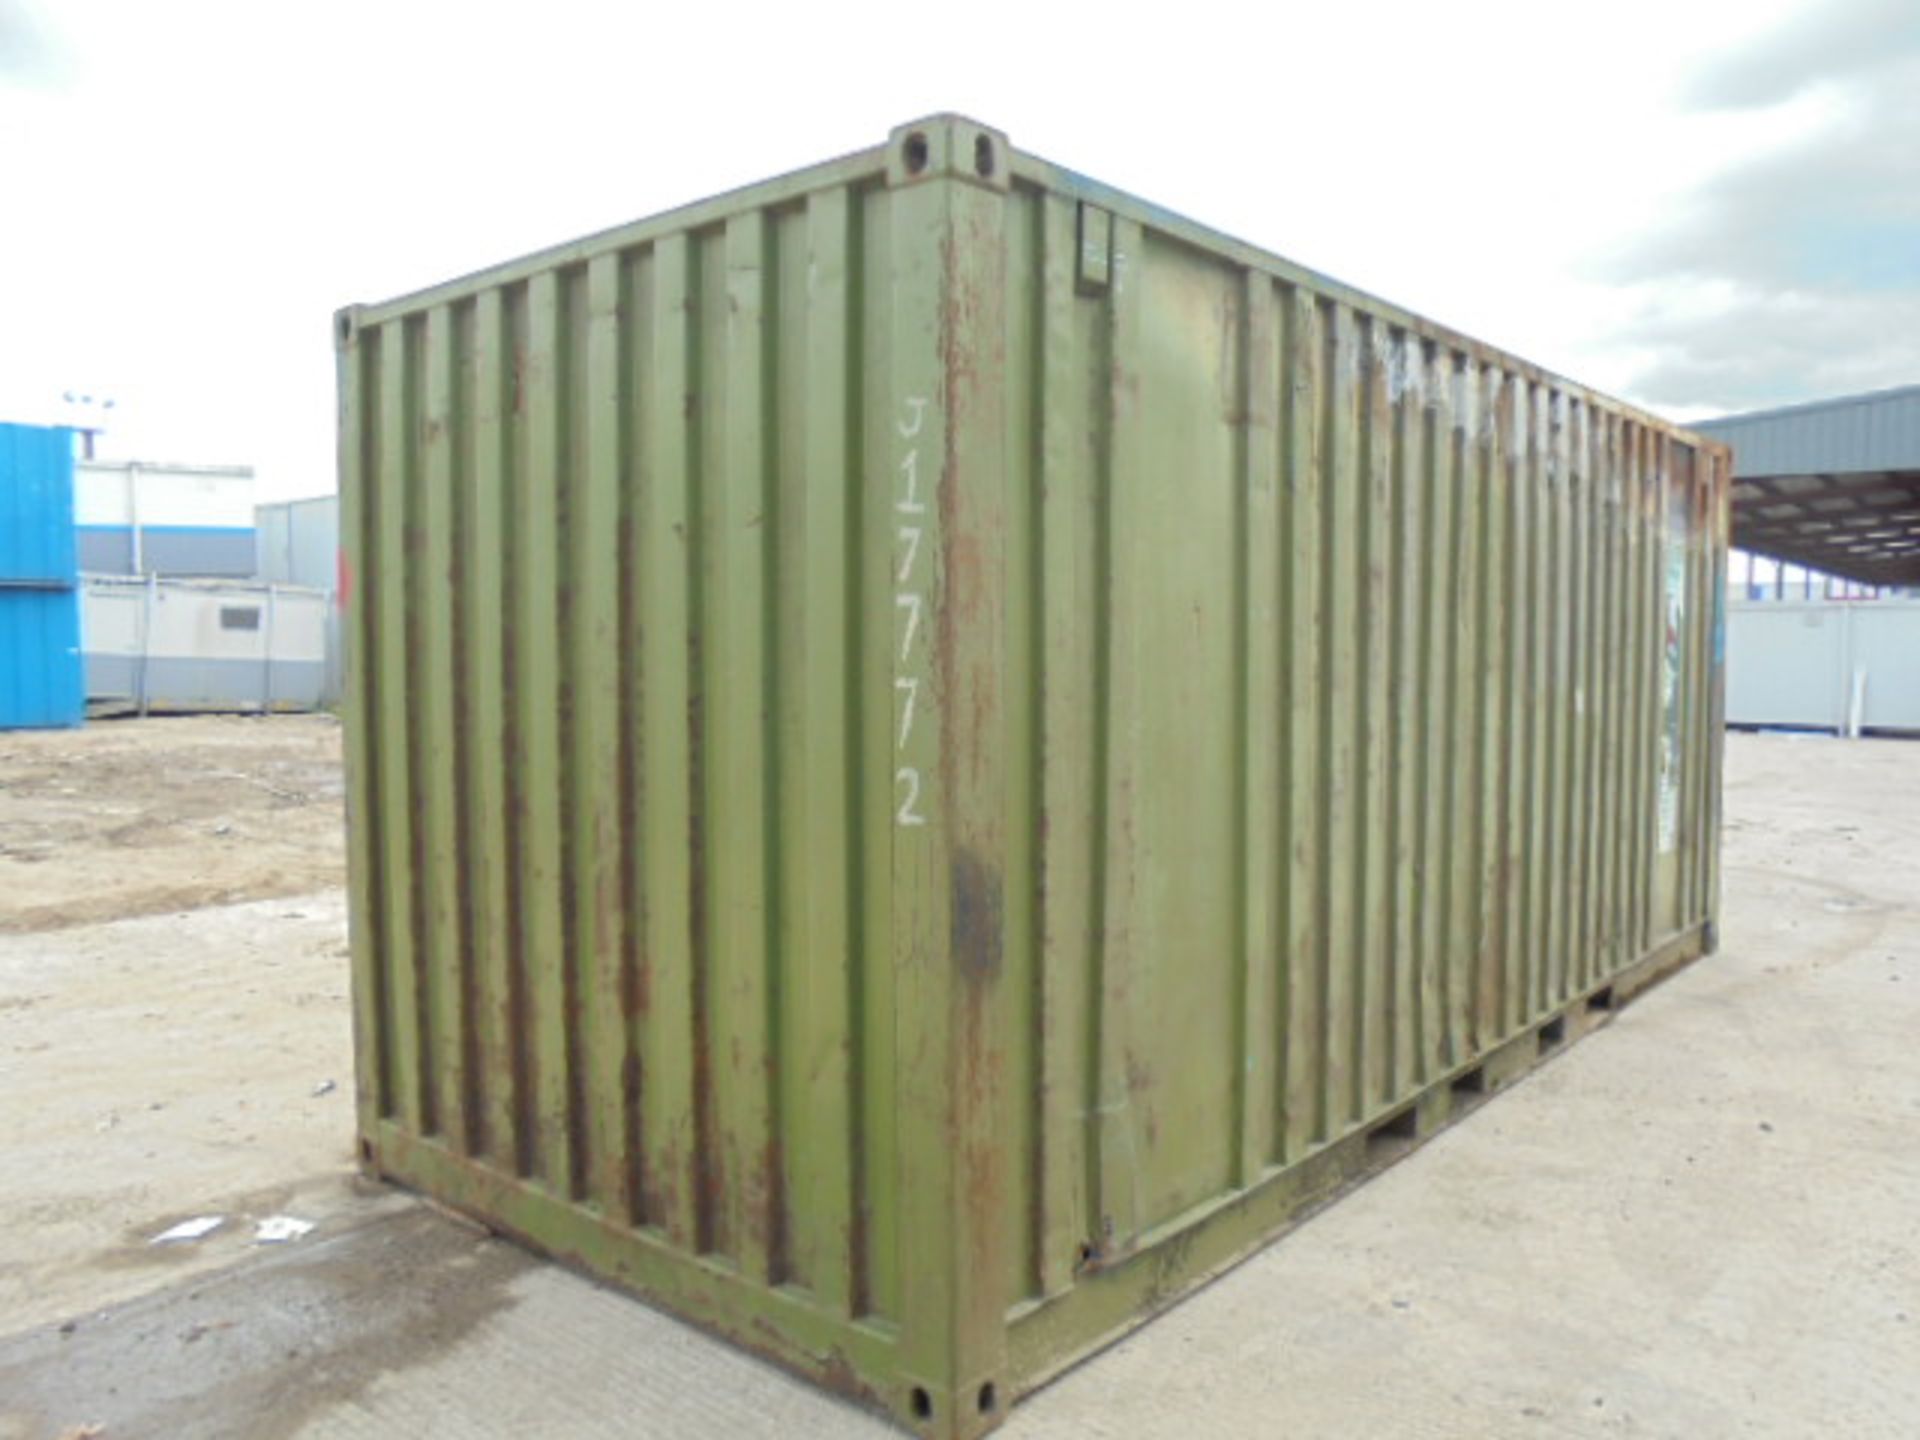 J17772 20ft x 8ft Steel Secure Container - Image 2 of 5